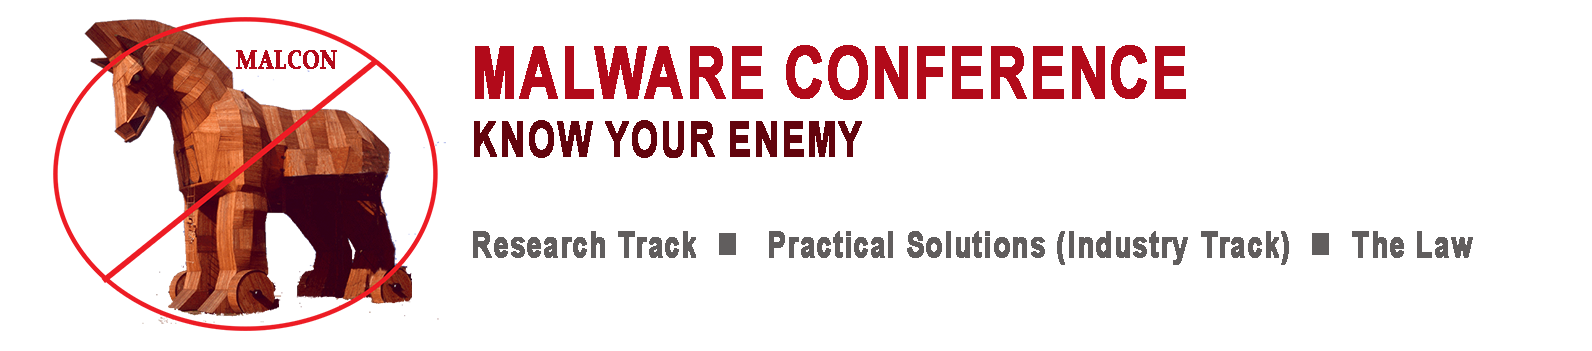 www.malwareconference.org